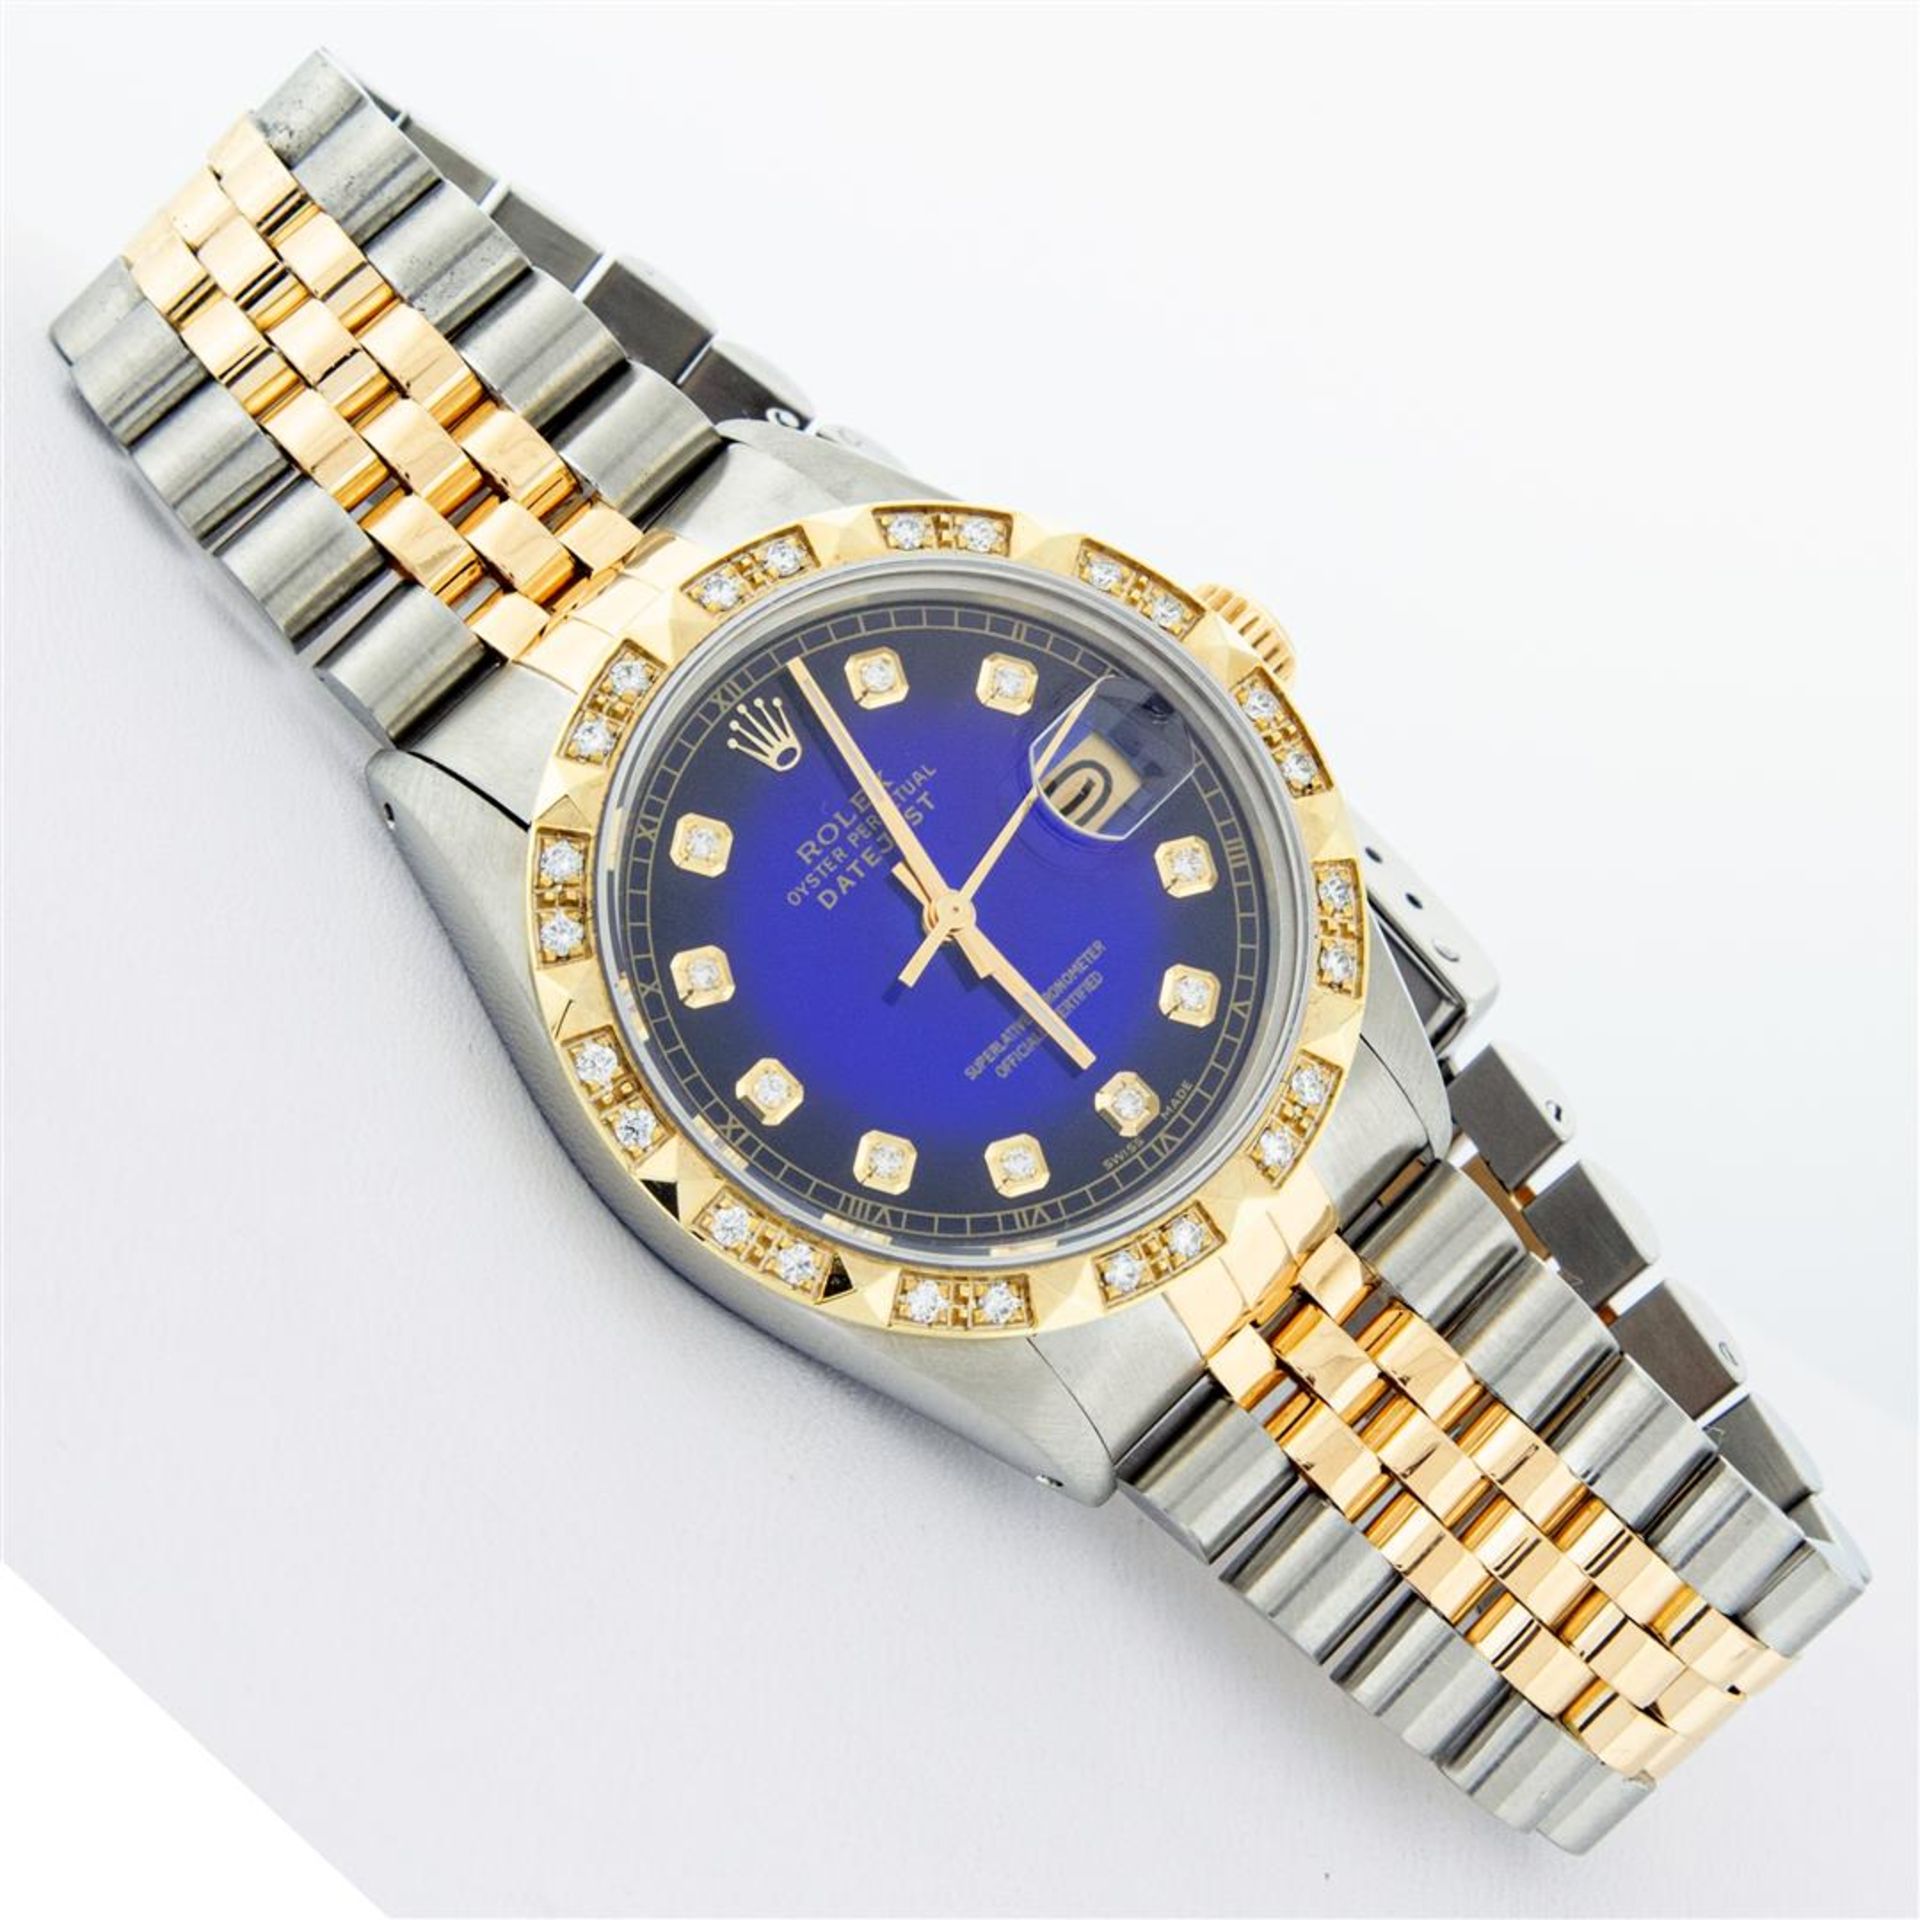 Rolex 2T Blue Vignette Pyramid Diamond Oyster Perpetual Datejust 36MM - Image 3 of 9